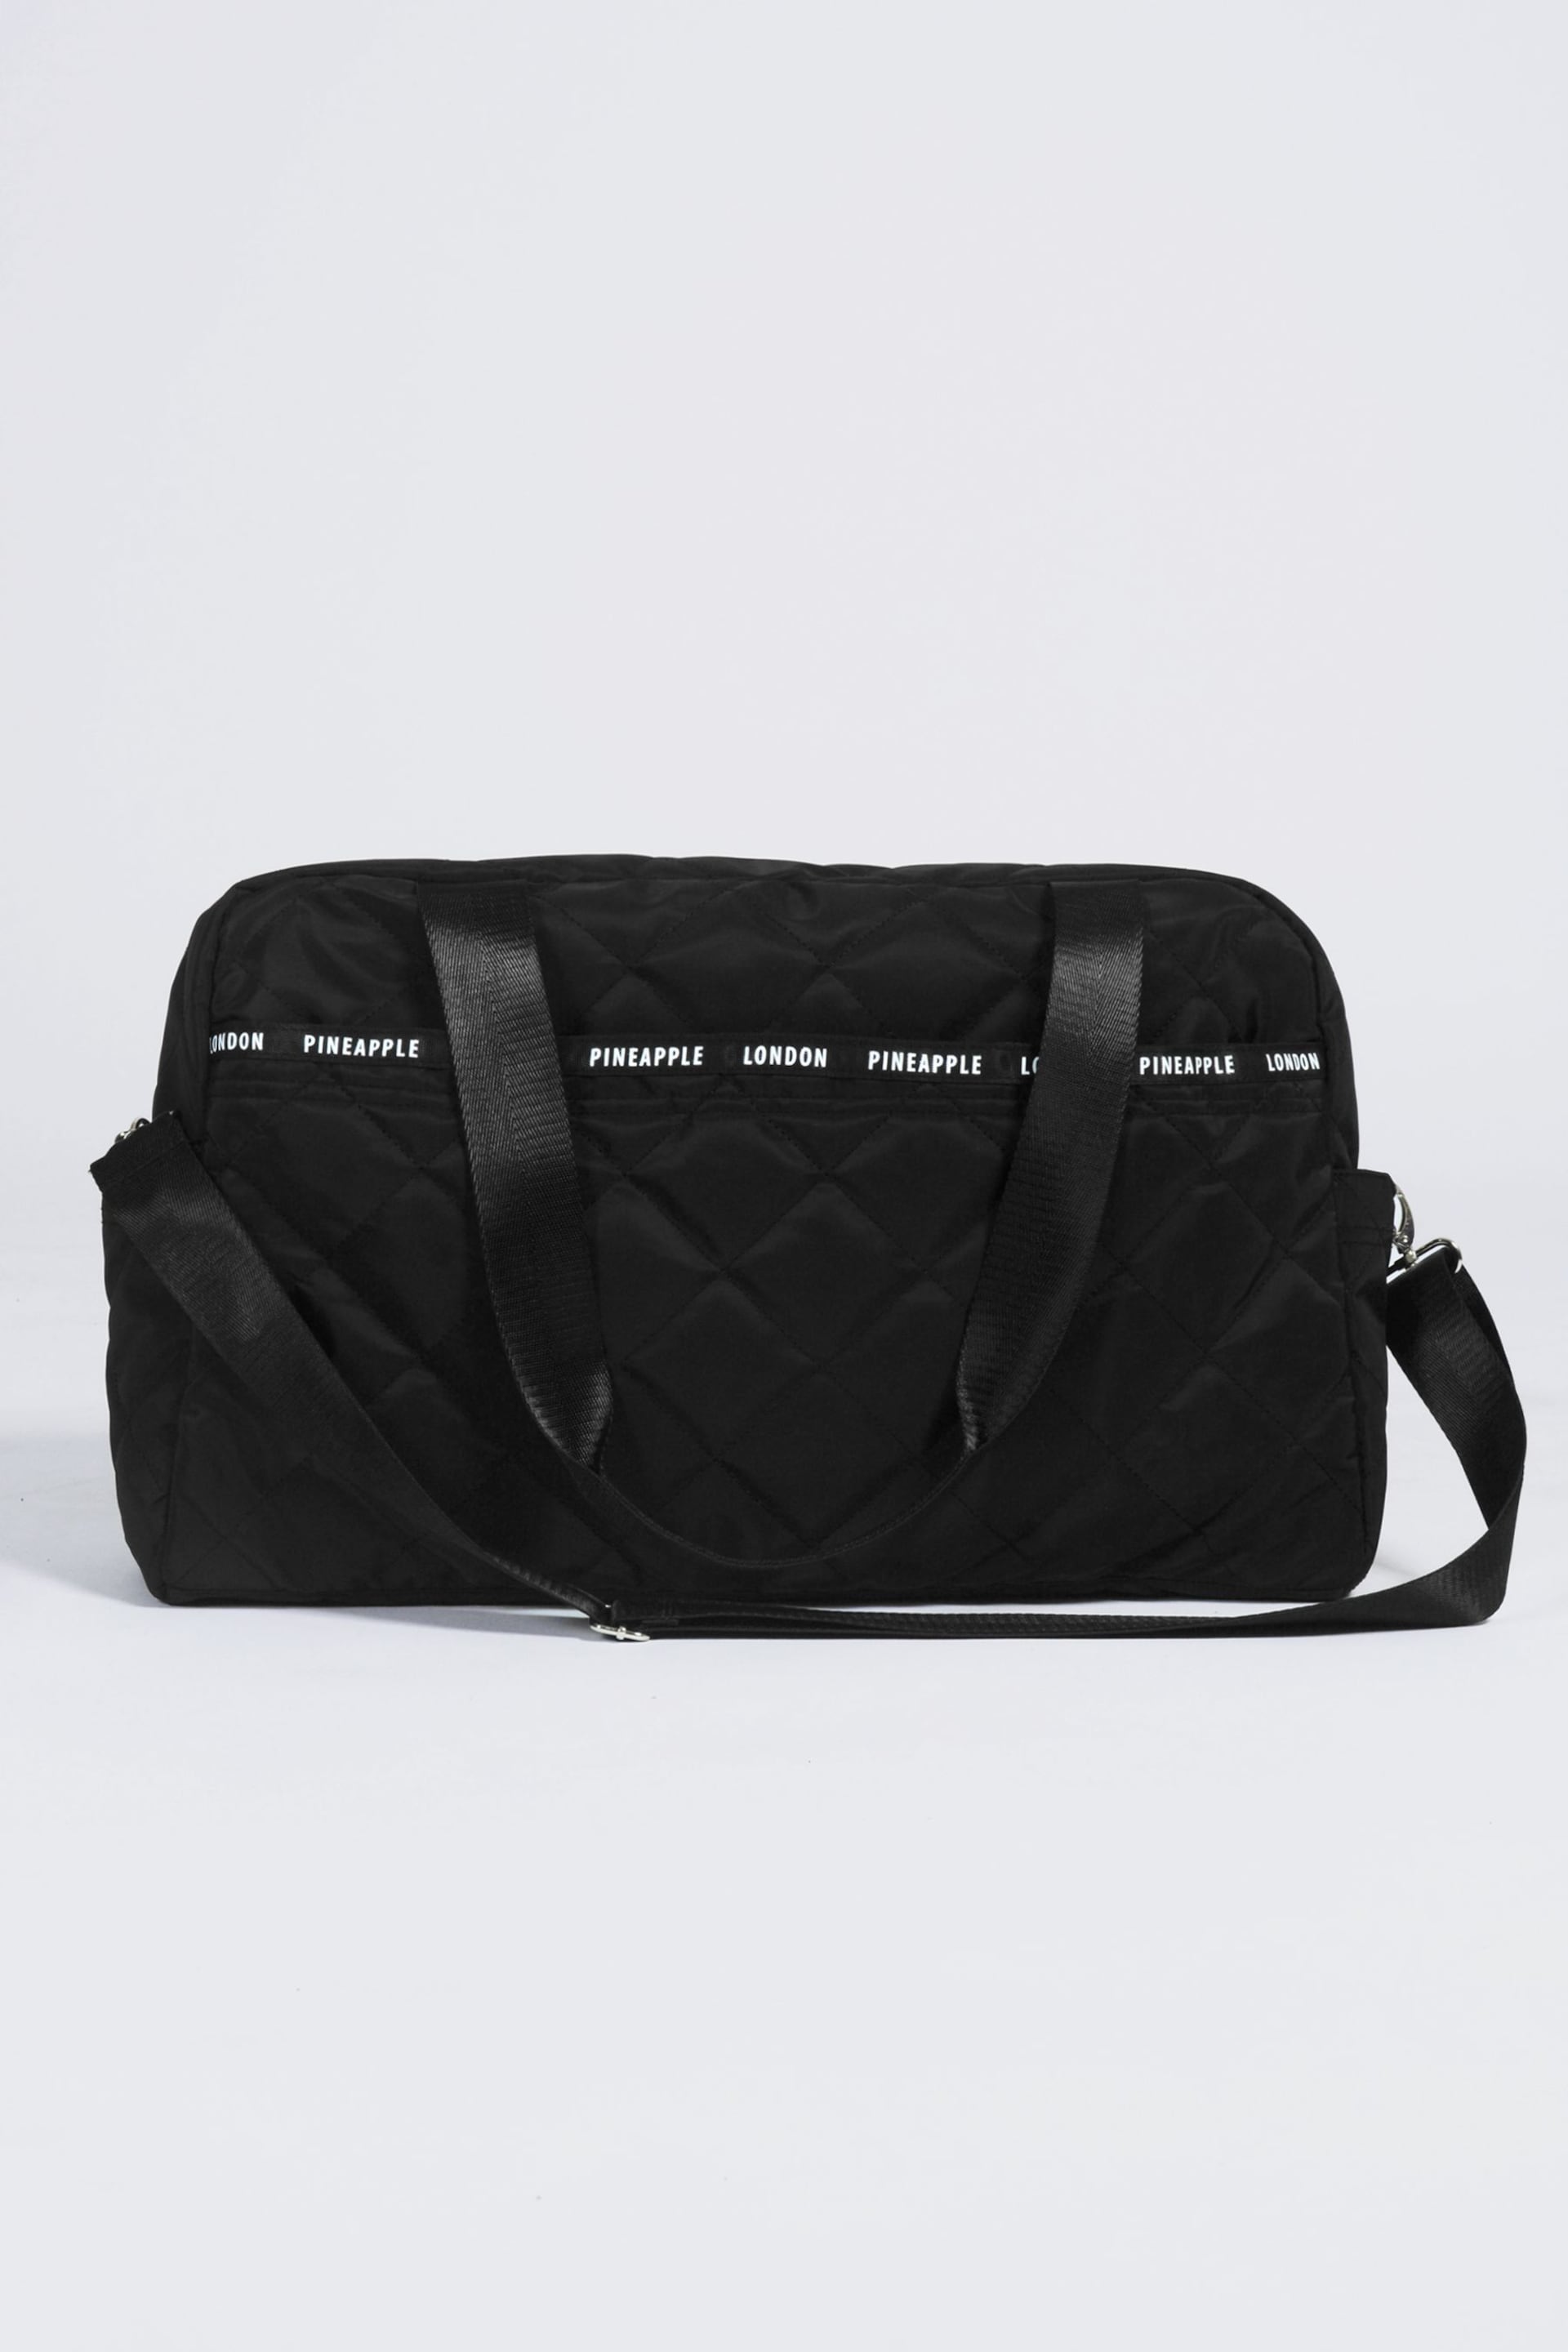 Pineapple Black Quilted Holdall Bag - Image 4 of 4